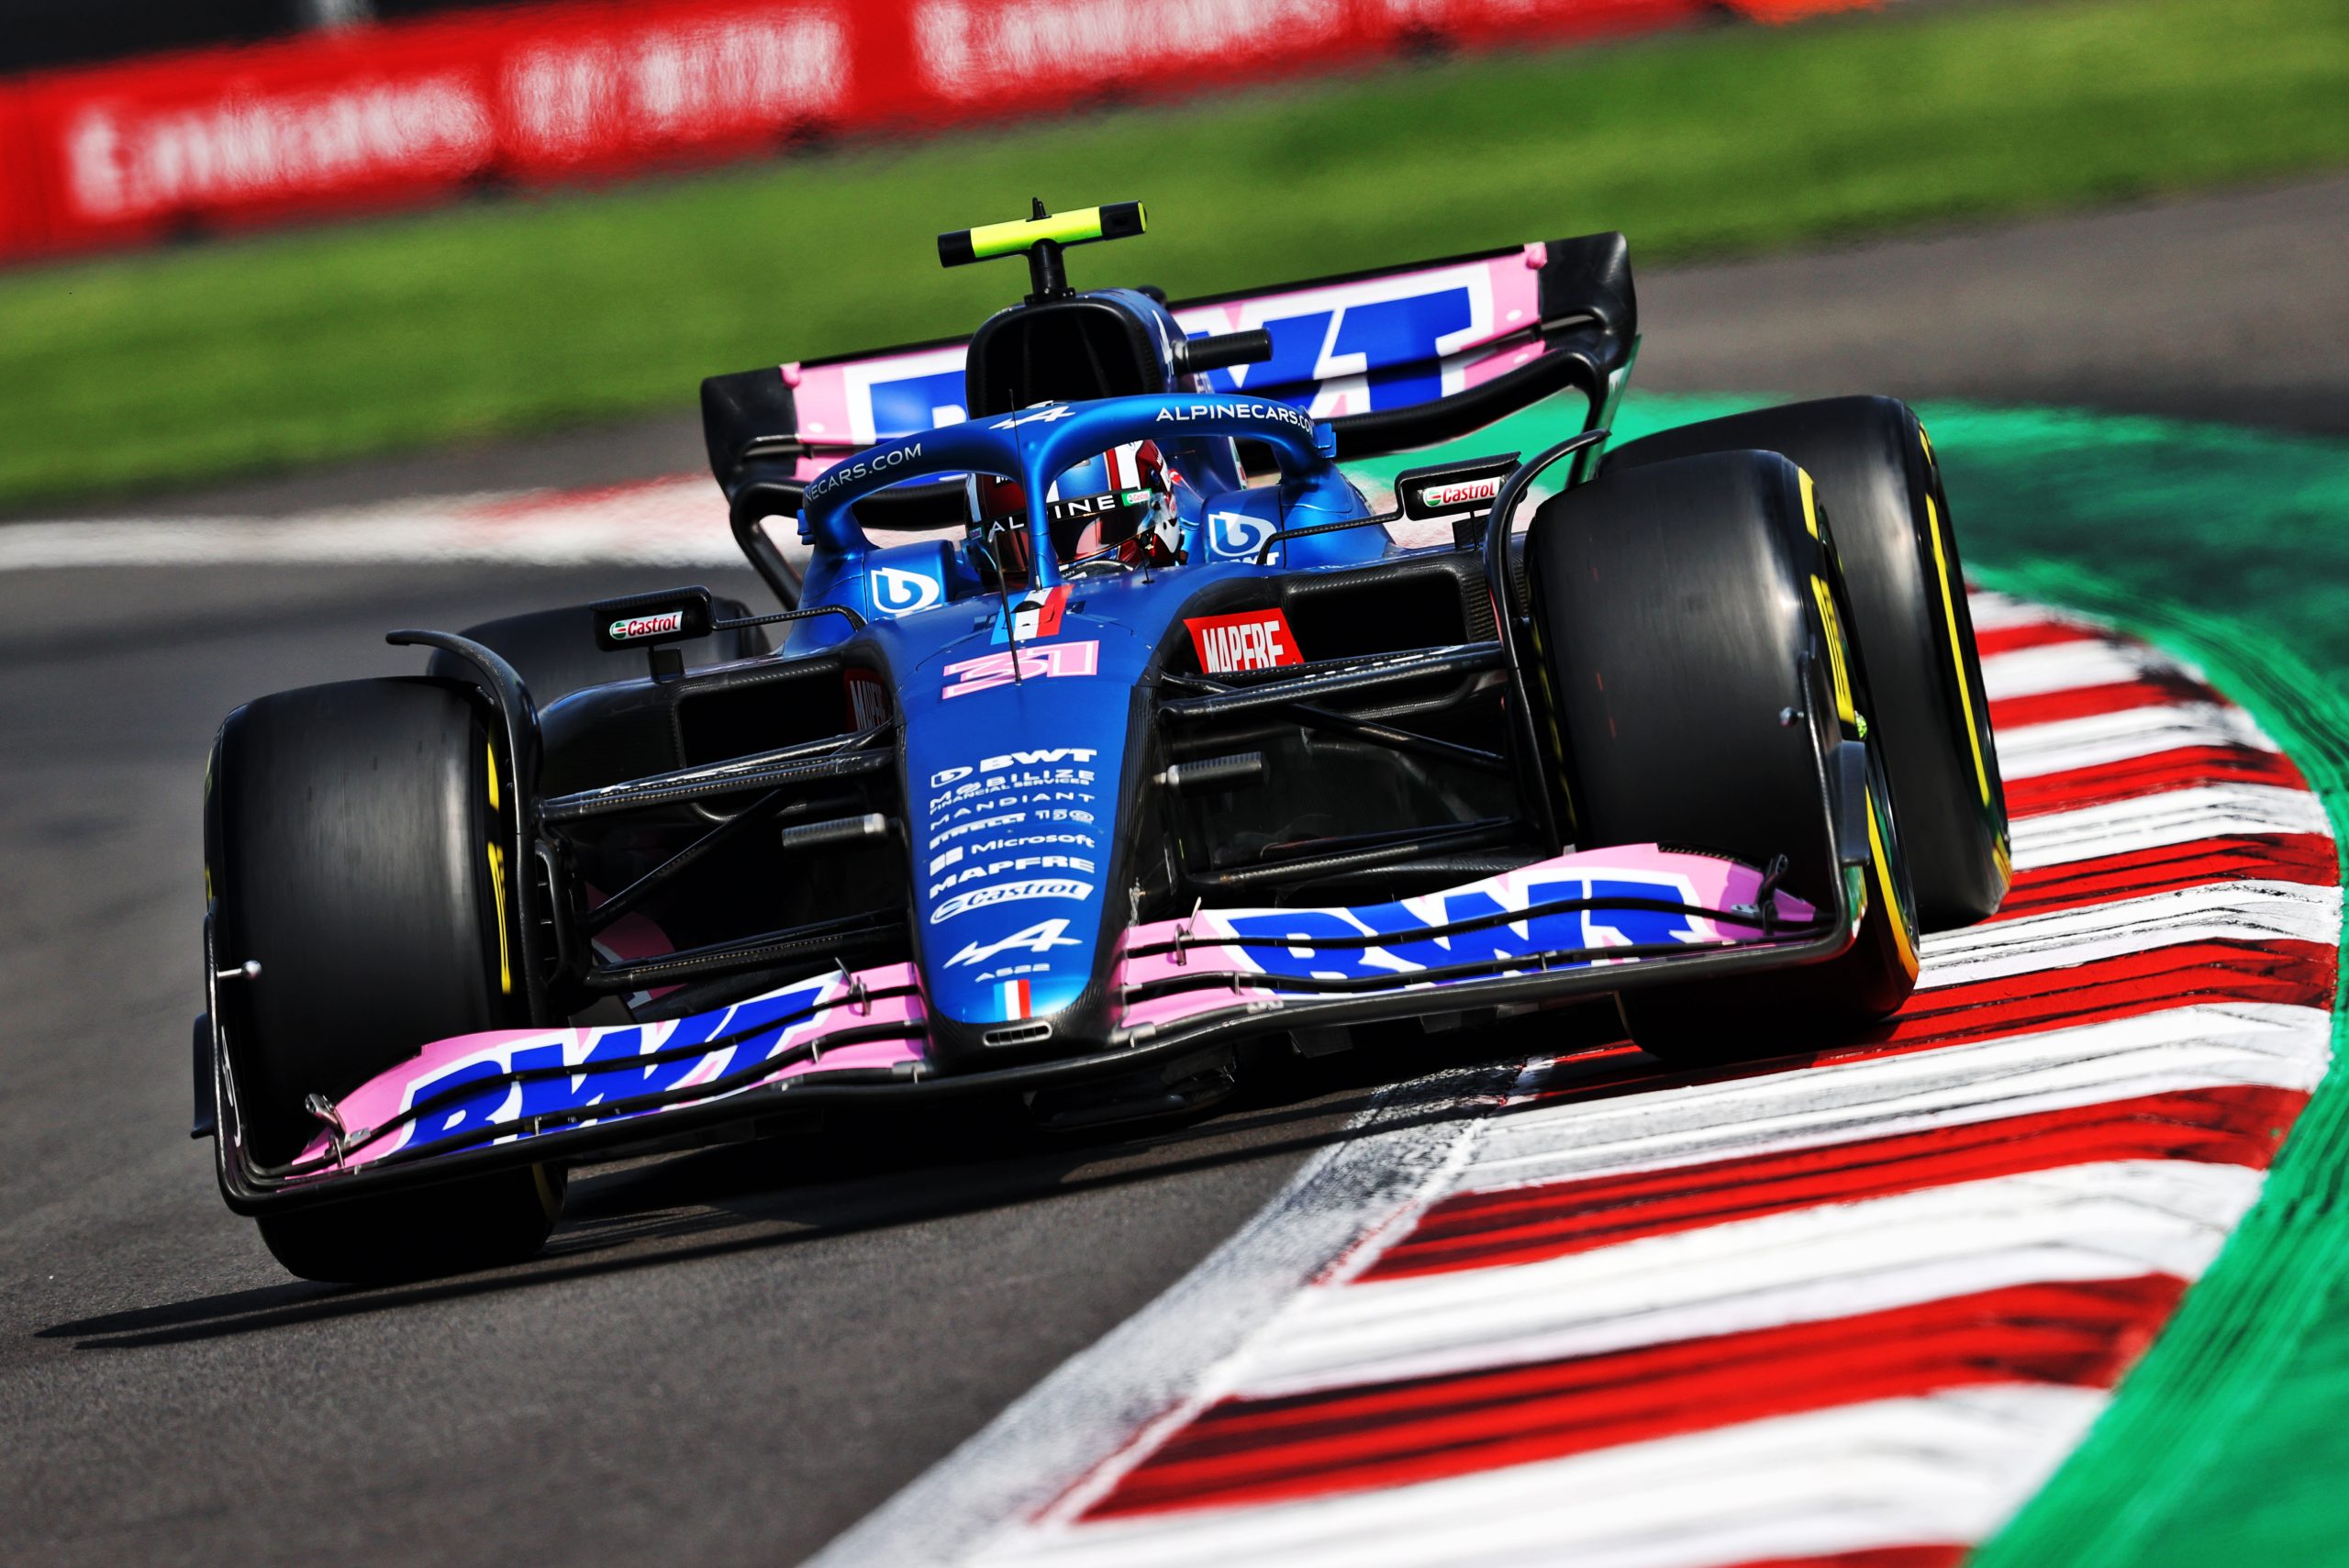 The car of Alpine driver Esteban Ocon banks left into a turn during a race.